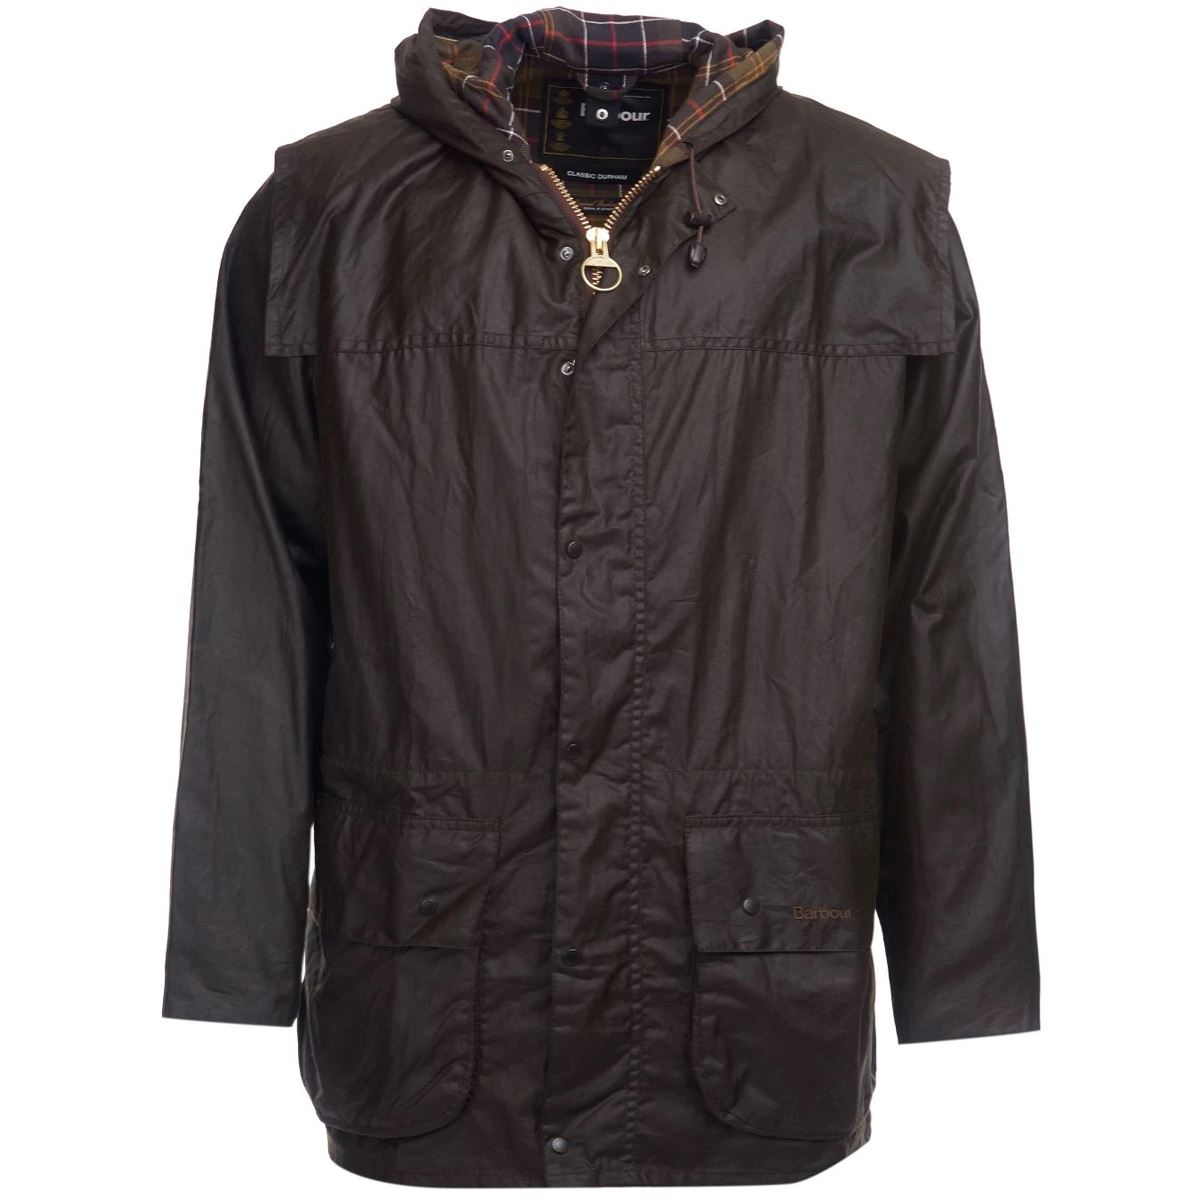 What is the Barbour Durham Jackets history?